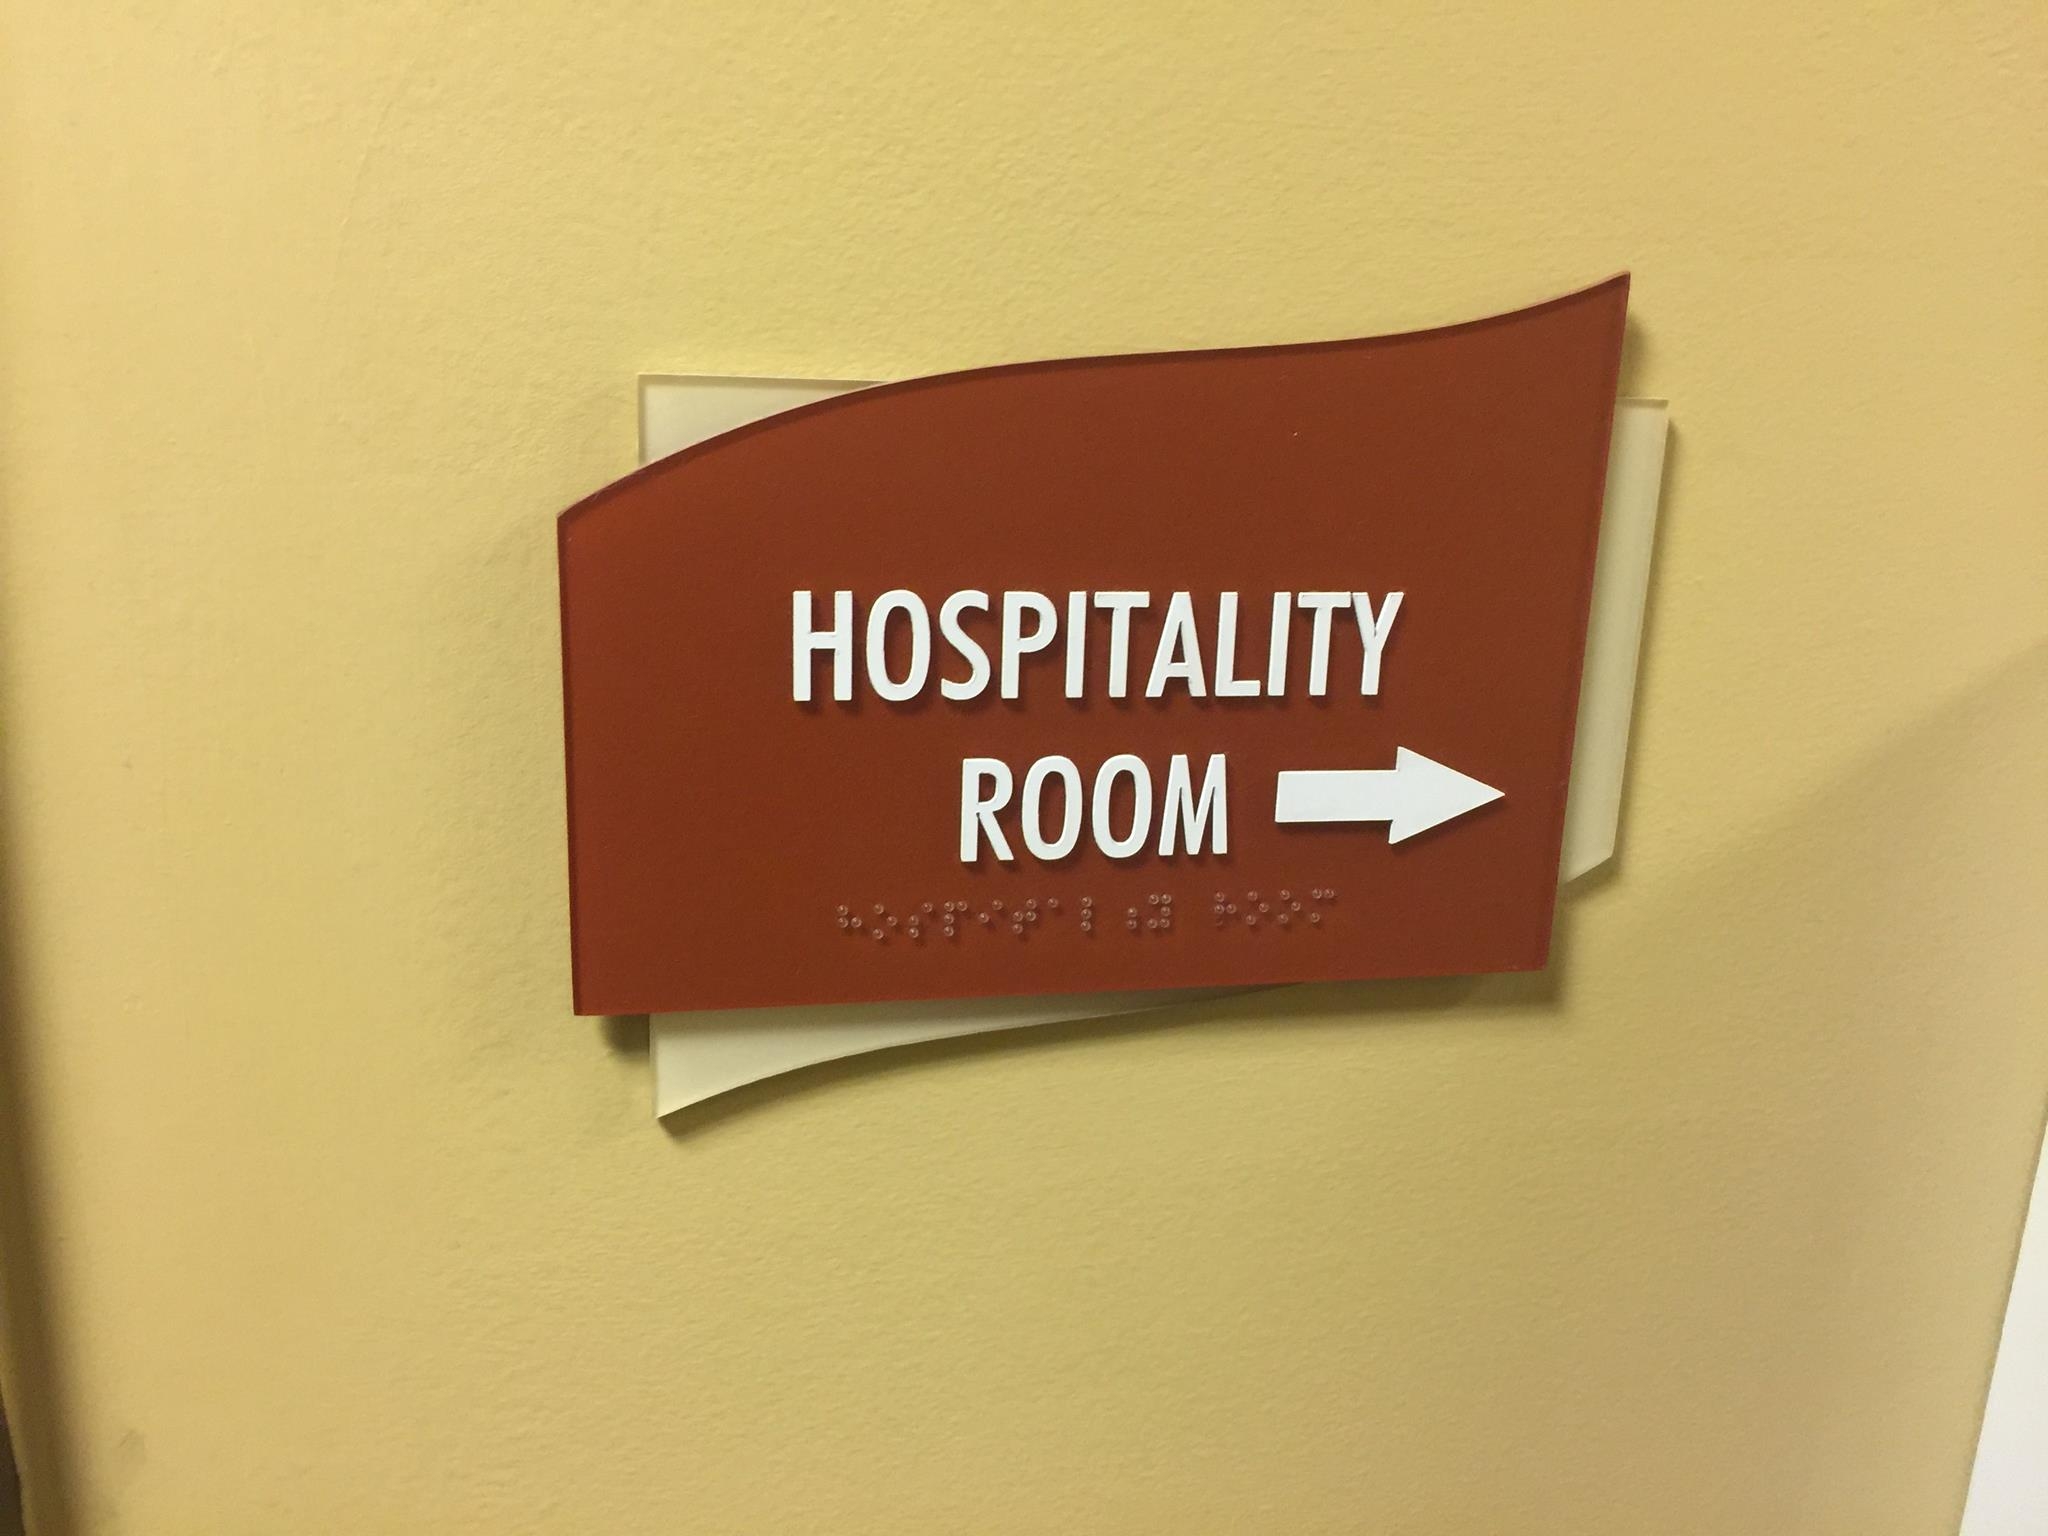 ADA Braille Sign in Hospital